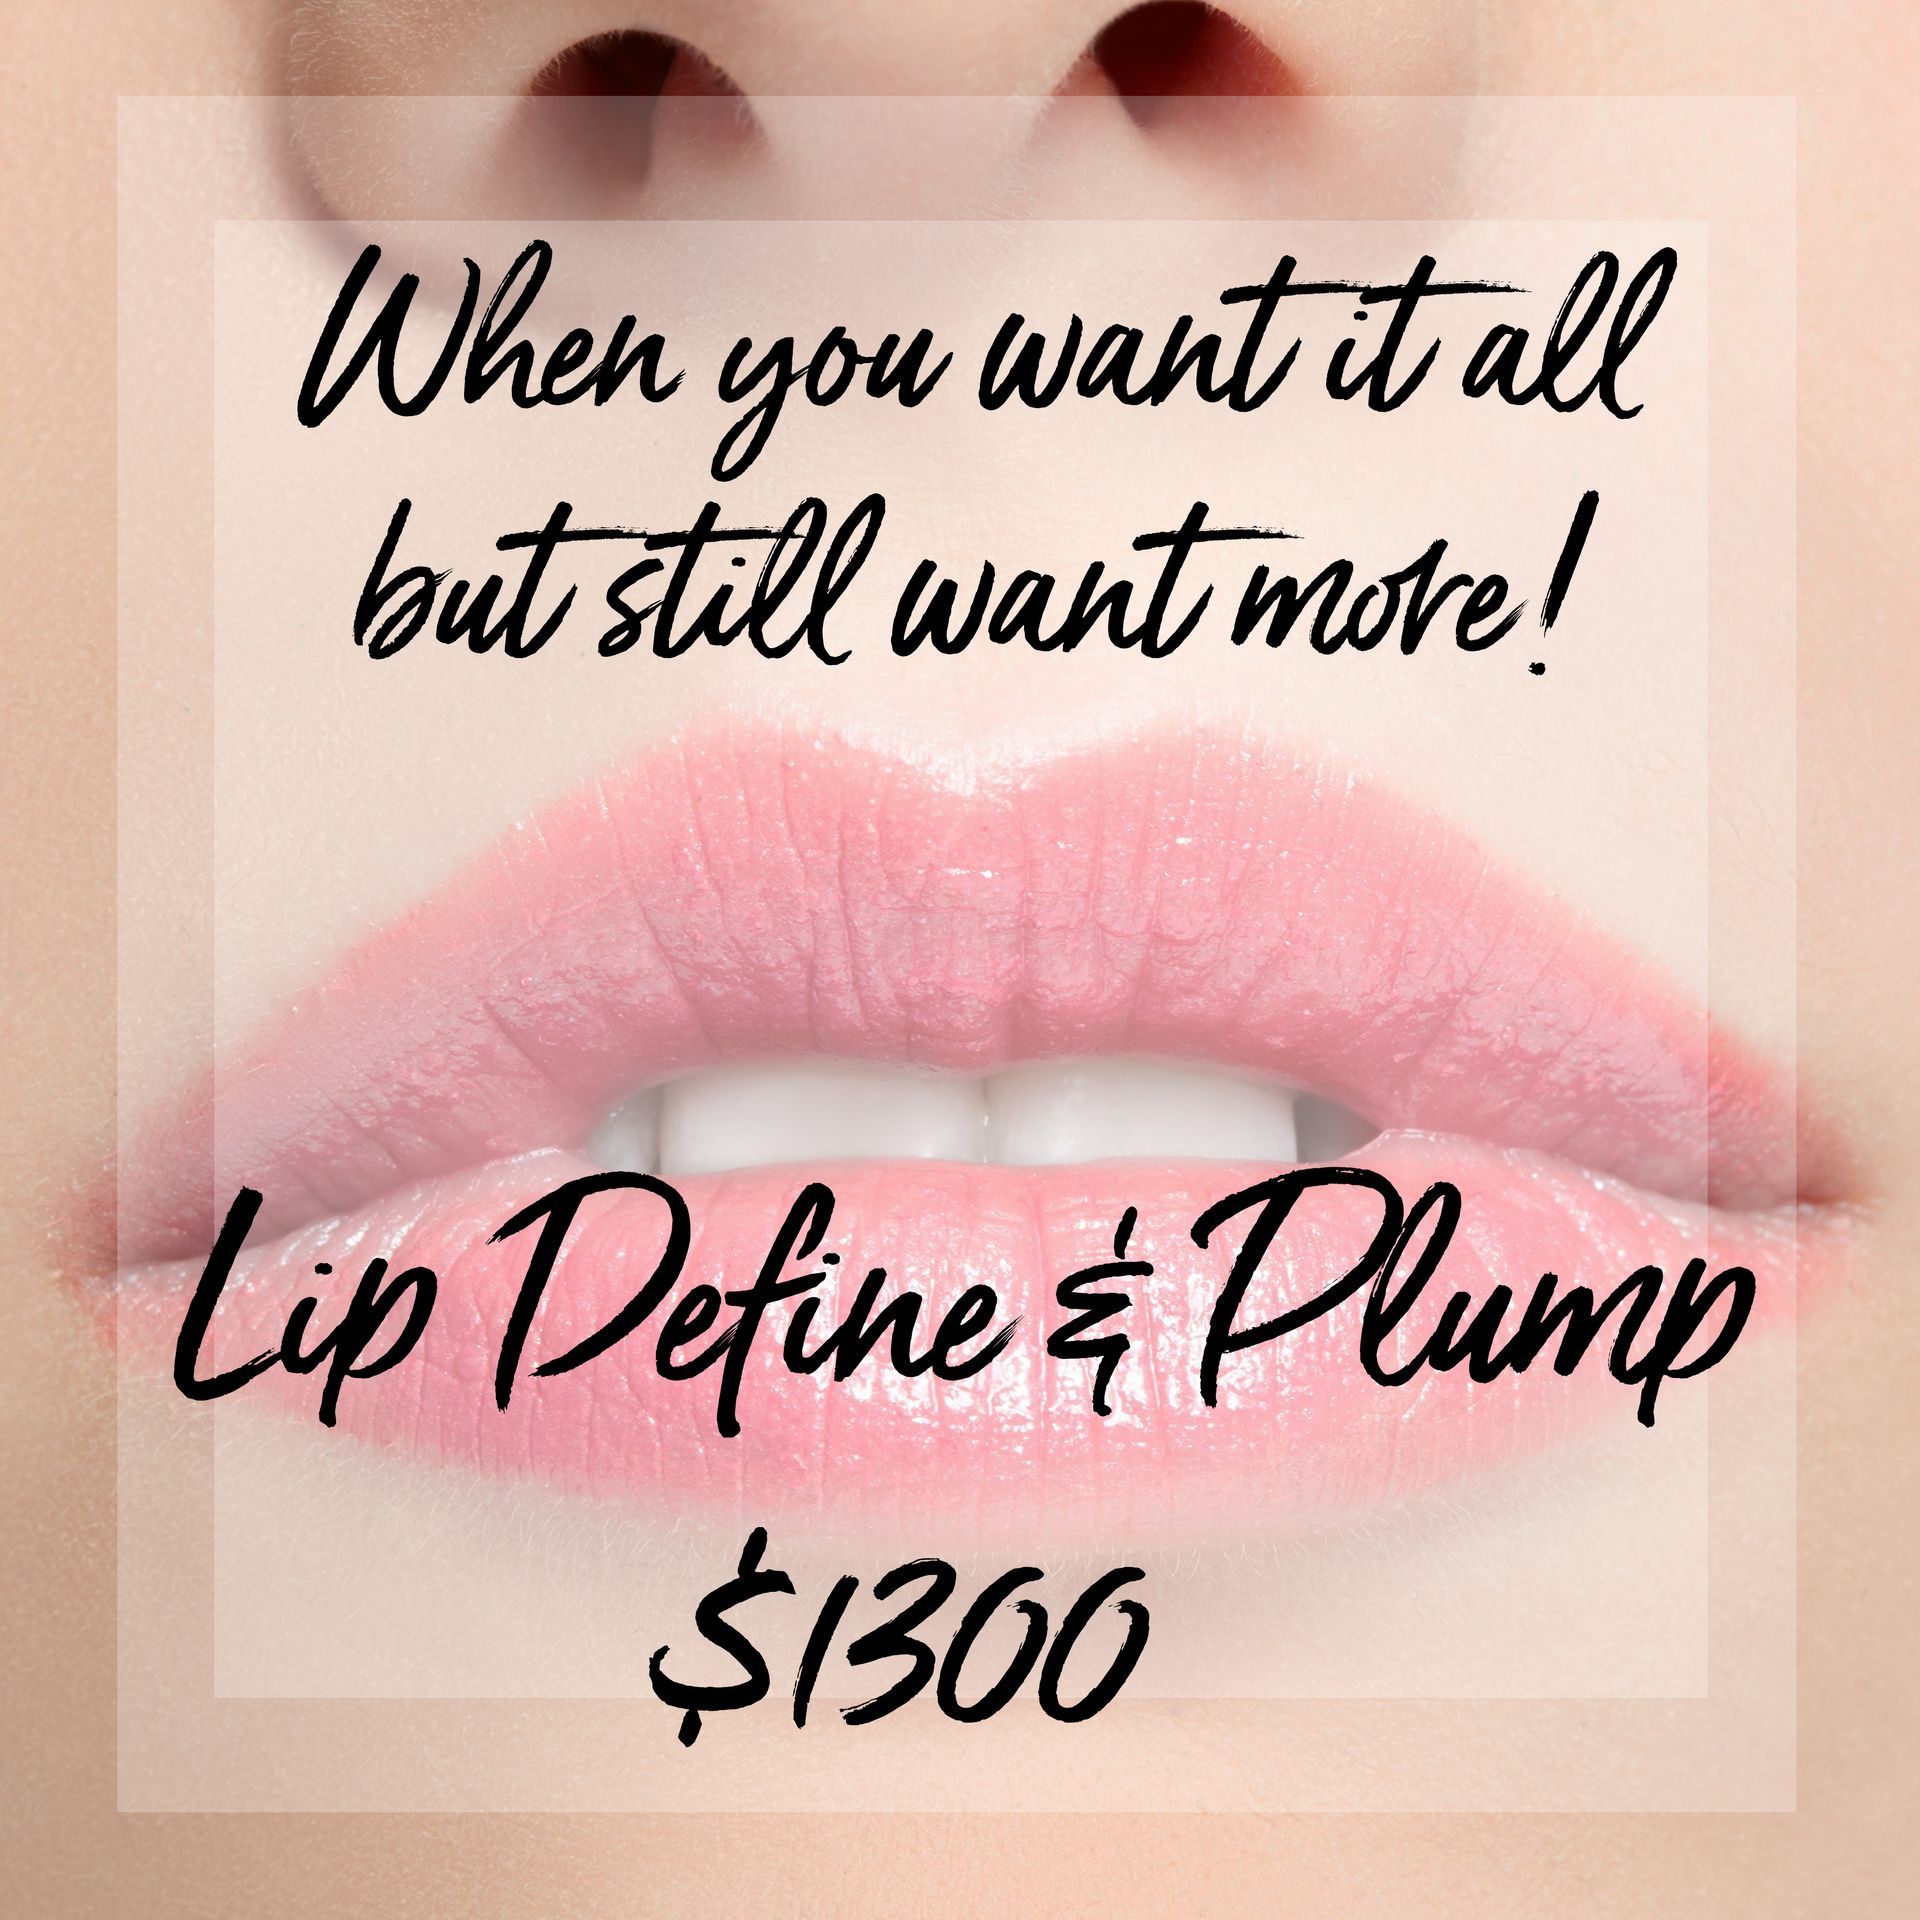 When you want it all but still want more ! lip define & plump $ 1300